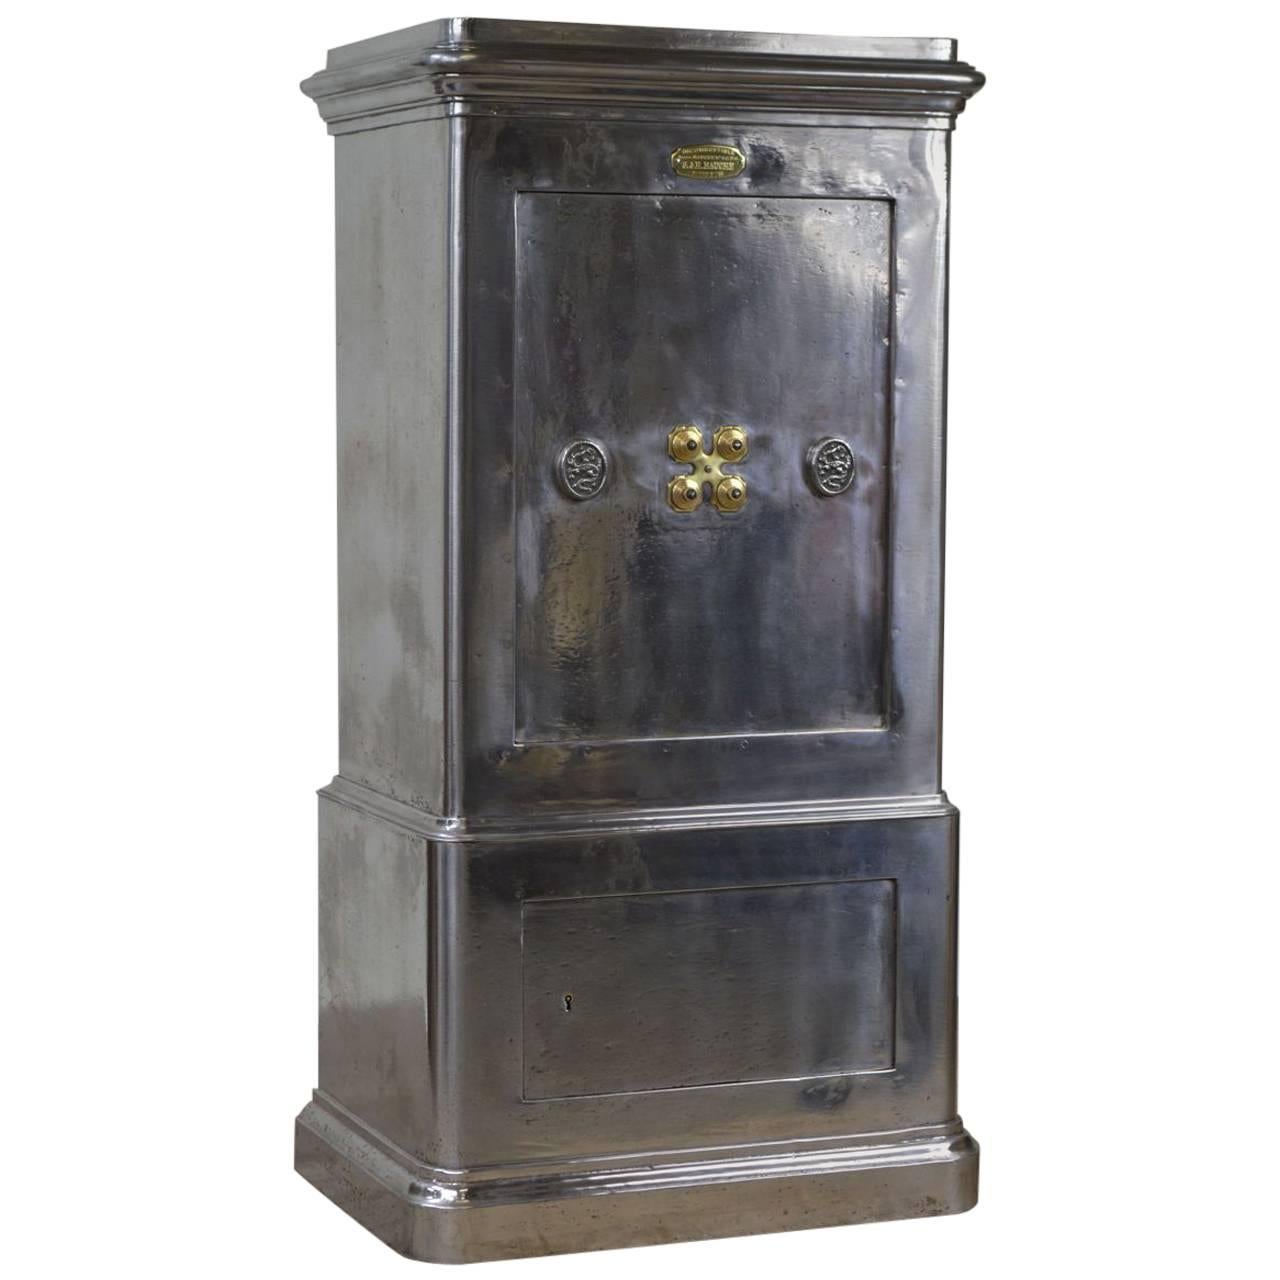 French Antique Cast Iron Safe by Bauche, circa 1930, Polished Mirror